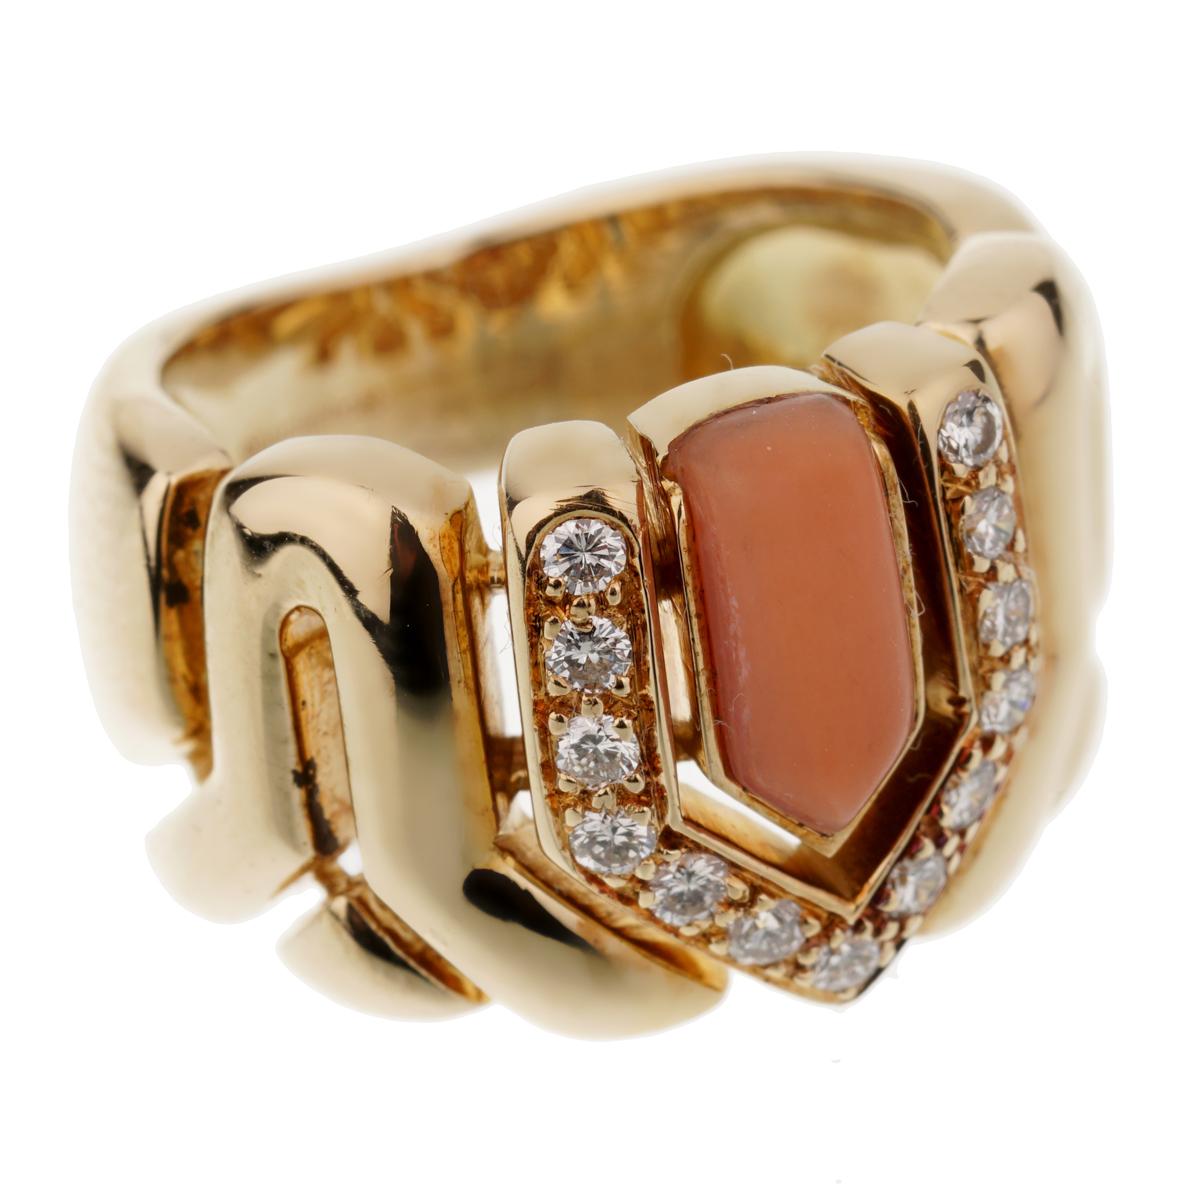 A fabulous vintage Boucheron ring showcasing a coral surrounded by 13 of the finest Boucheron round brilliant cut diamonds set in 18k yellow gold. The ring measures a size 4 1/2 and can be resized.